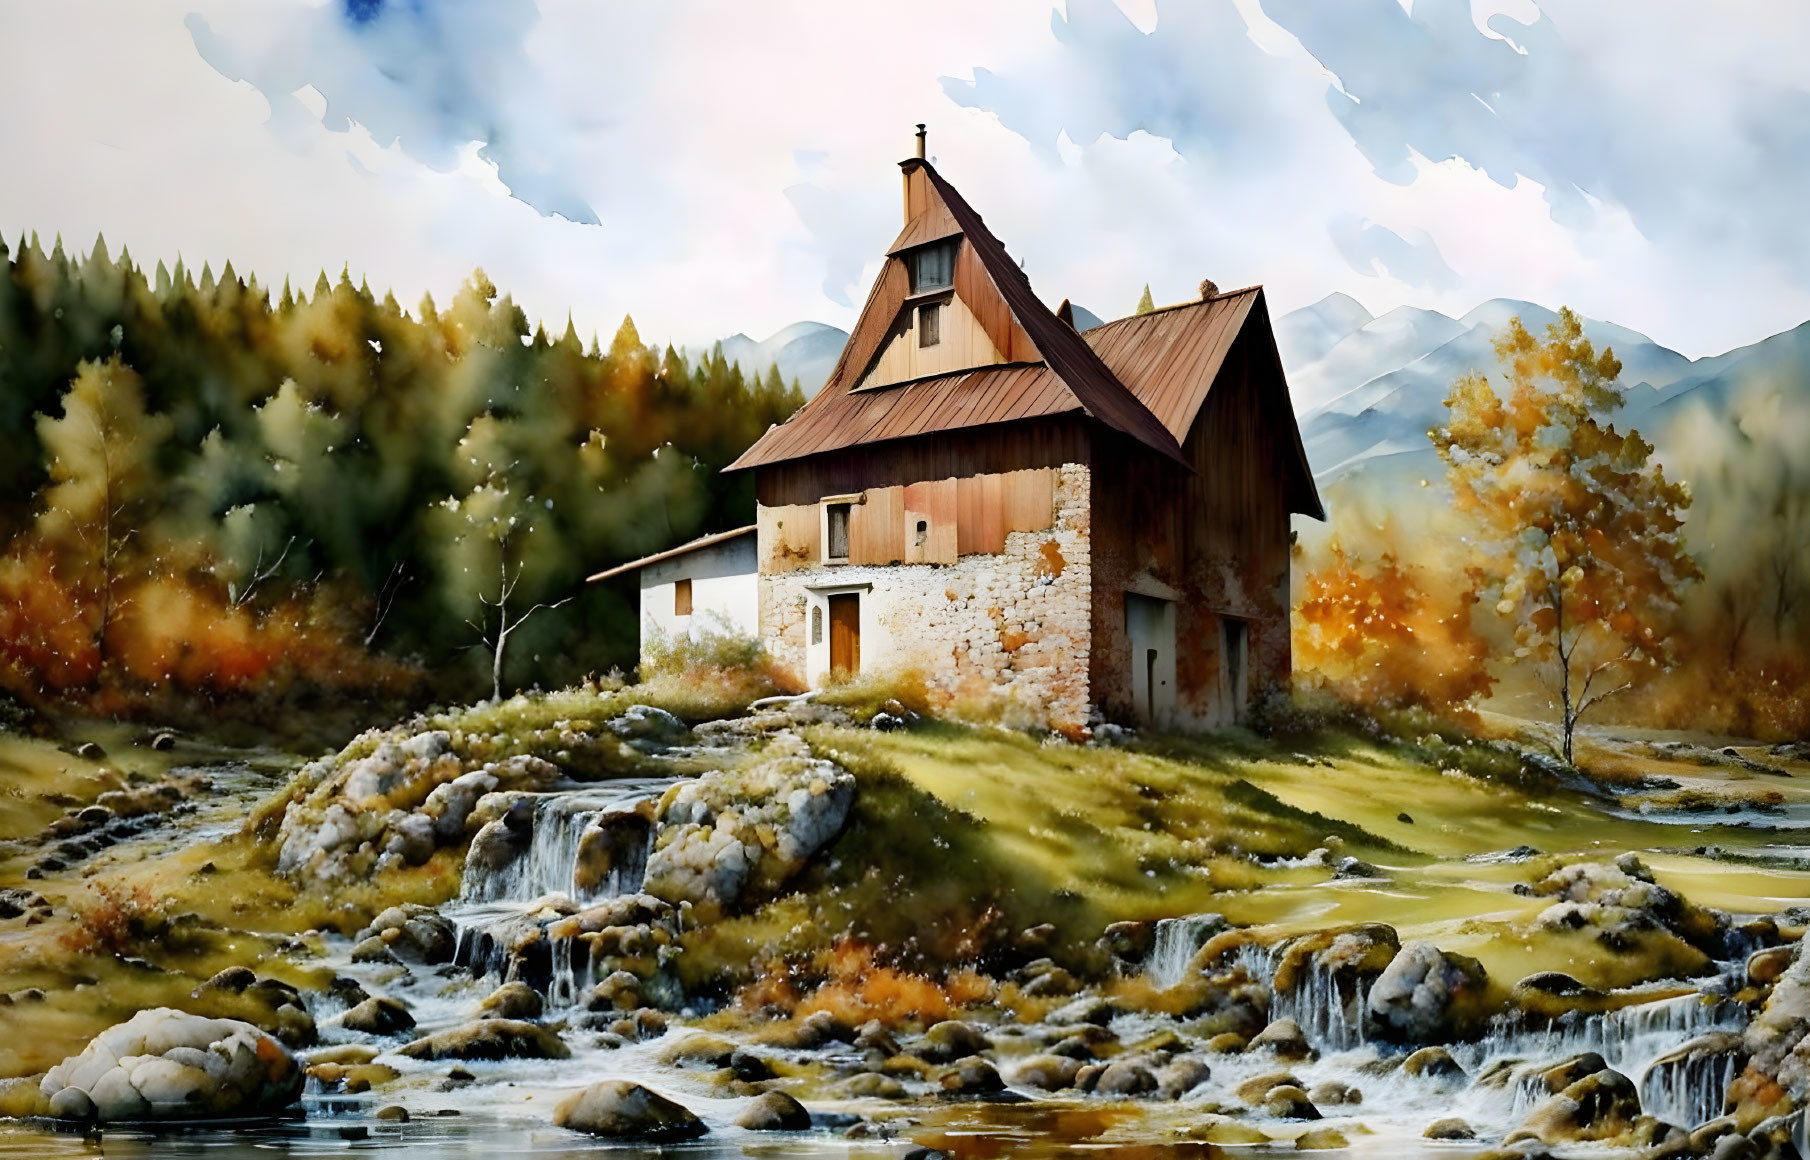 Digital Artwork: Rustic House by Stream, Autumn Trees, Mountains